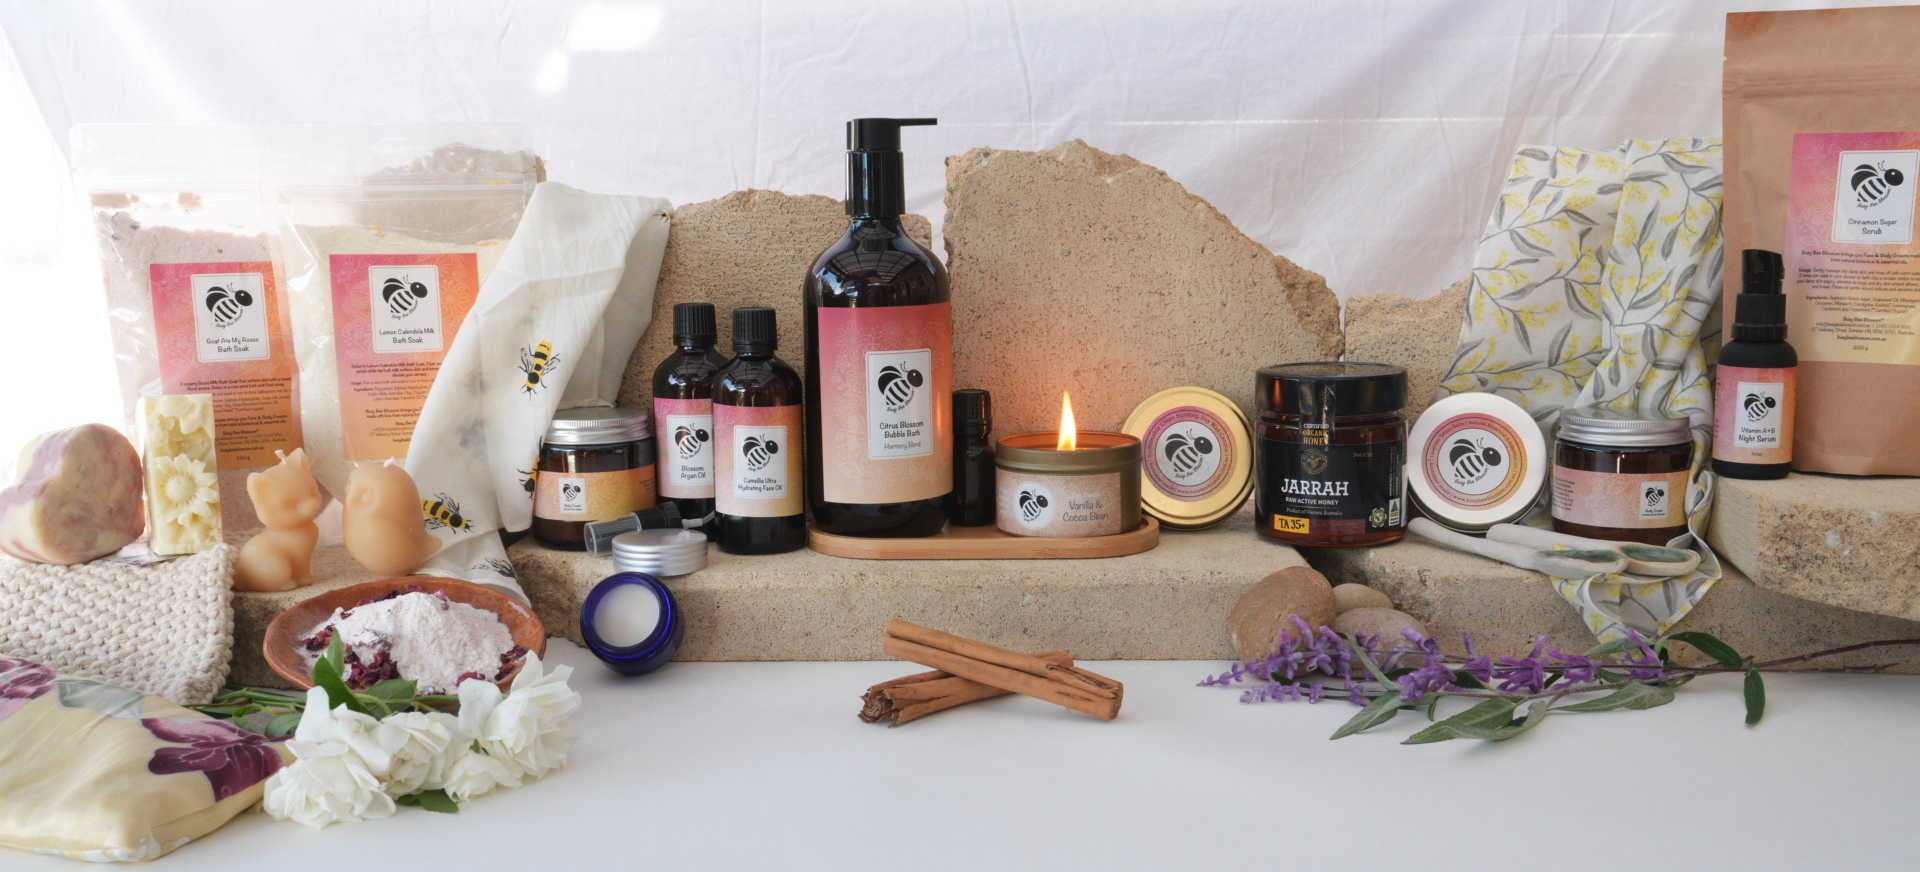 Busy Bee Blossom's range of natural botanical skincare, textiles and eco-friendly candles